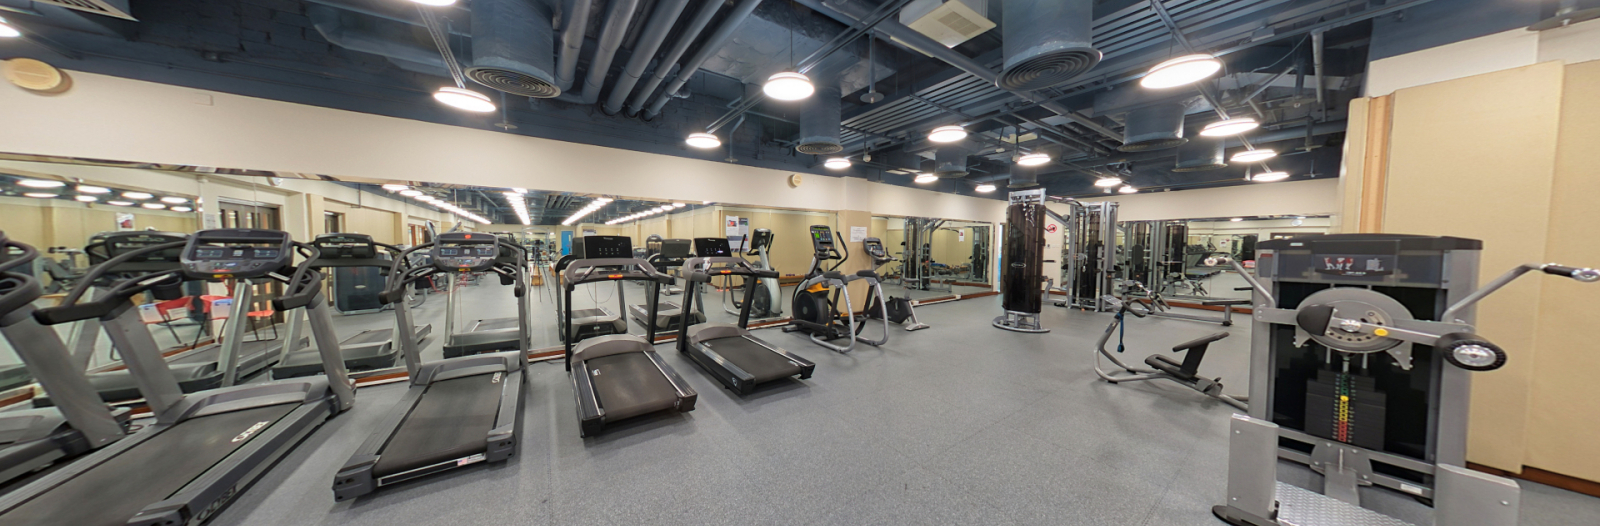 Physical Fitness Room